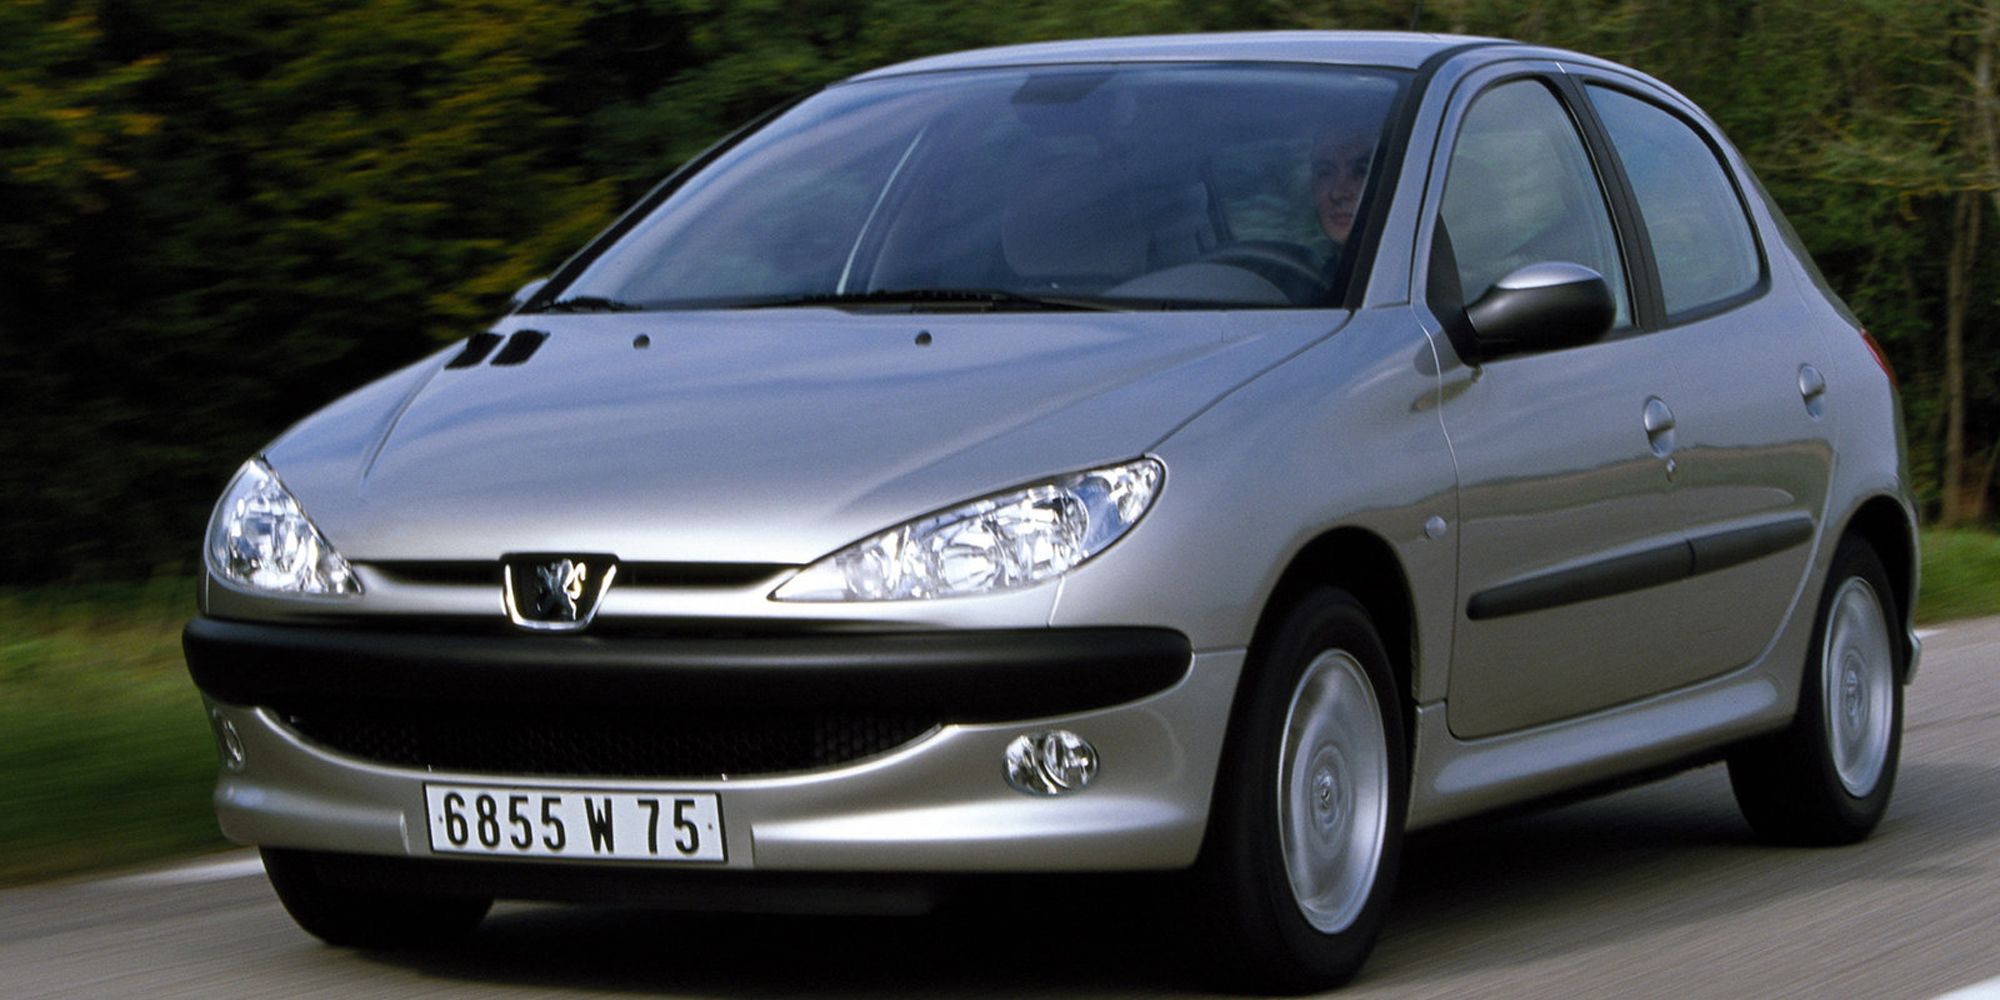 The front of a Peugeot 206 on the move